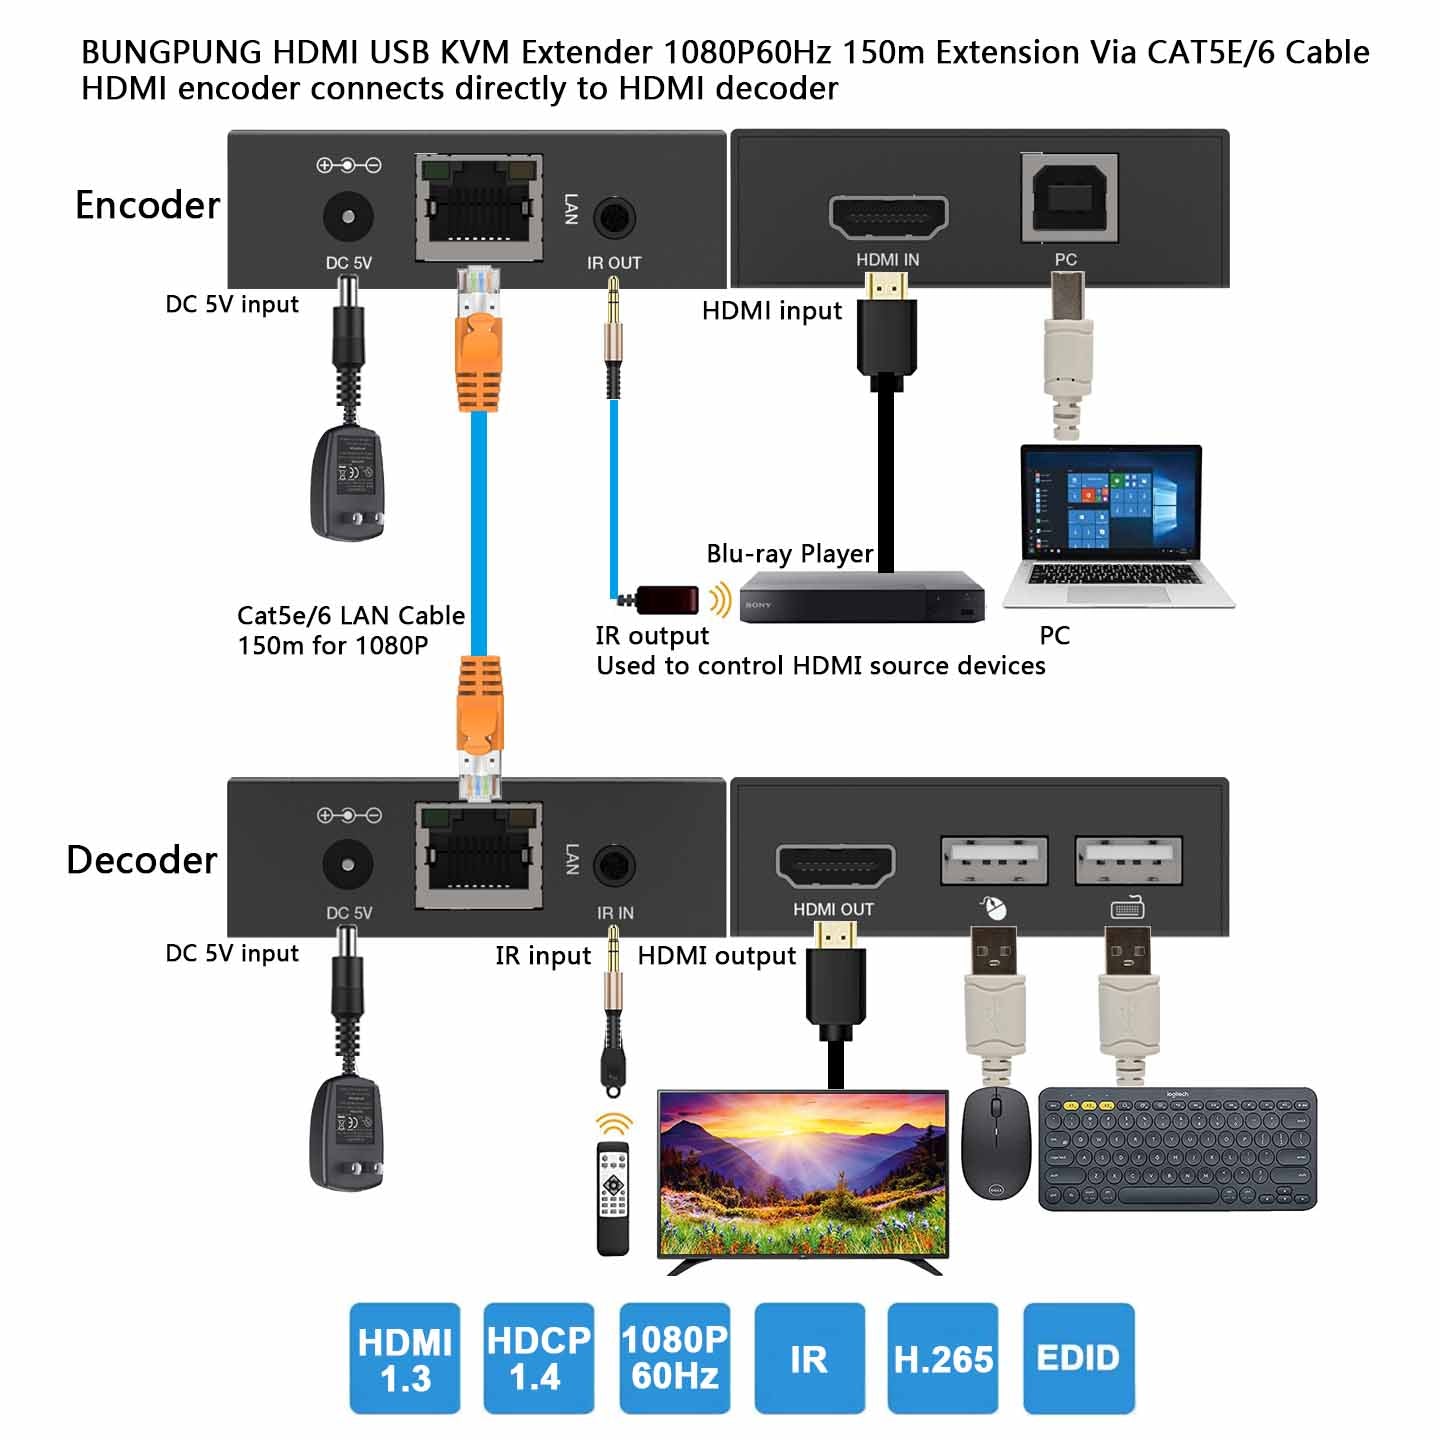 HDMI KVM Extender over IP Ethernet Cat5e/6 Cable 1080P 60Hz 150m 1 to 1 connection